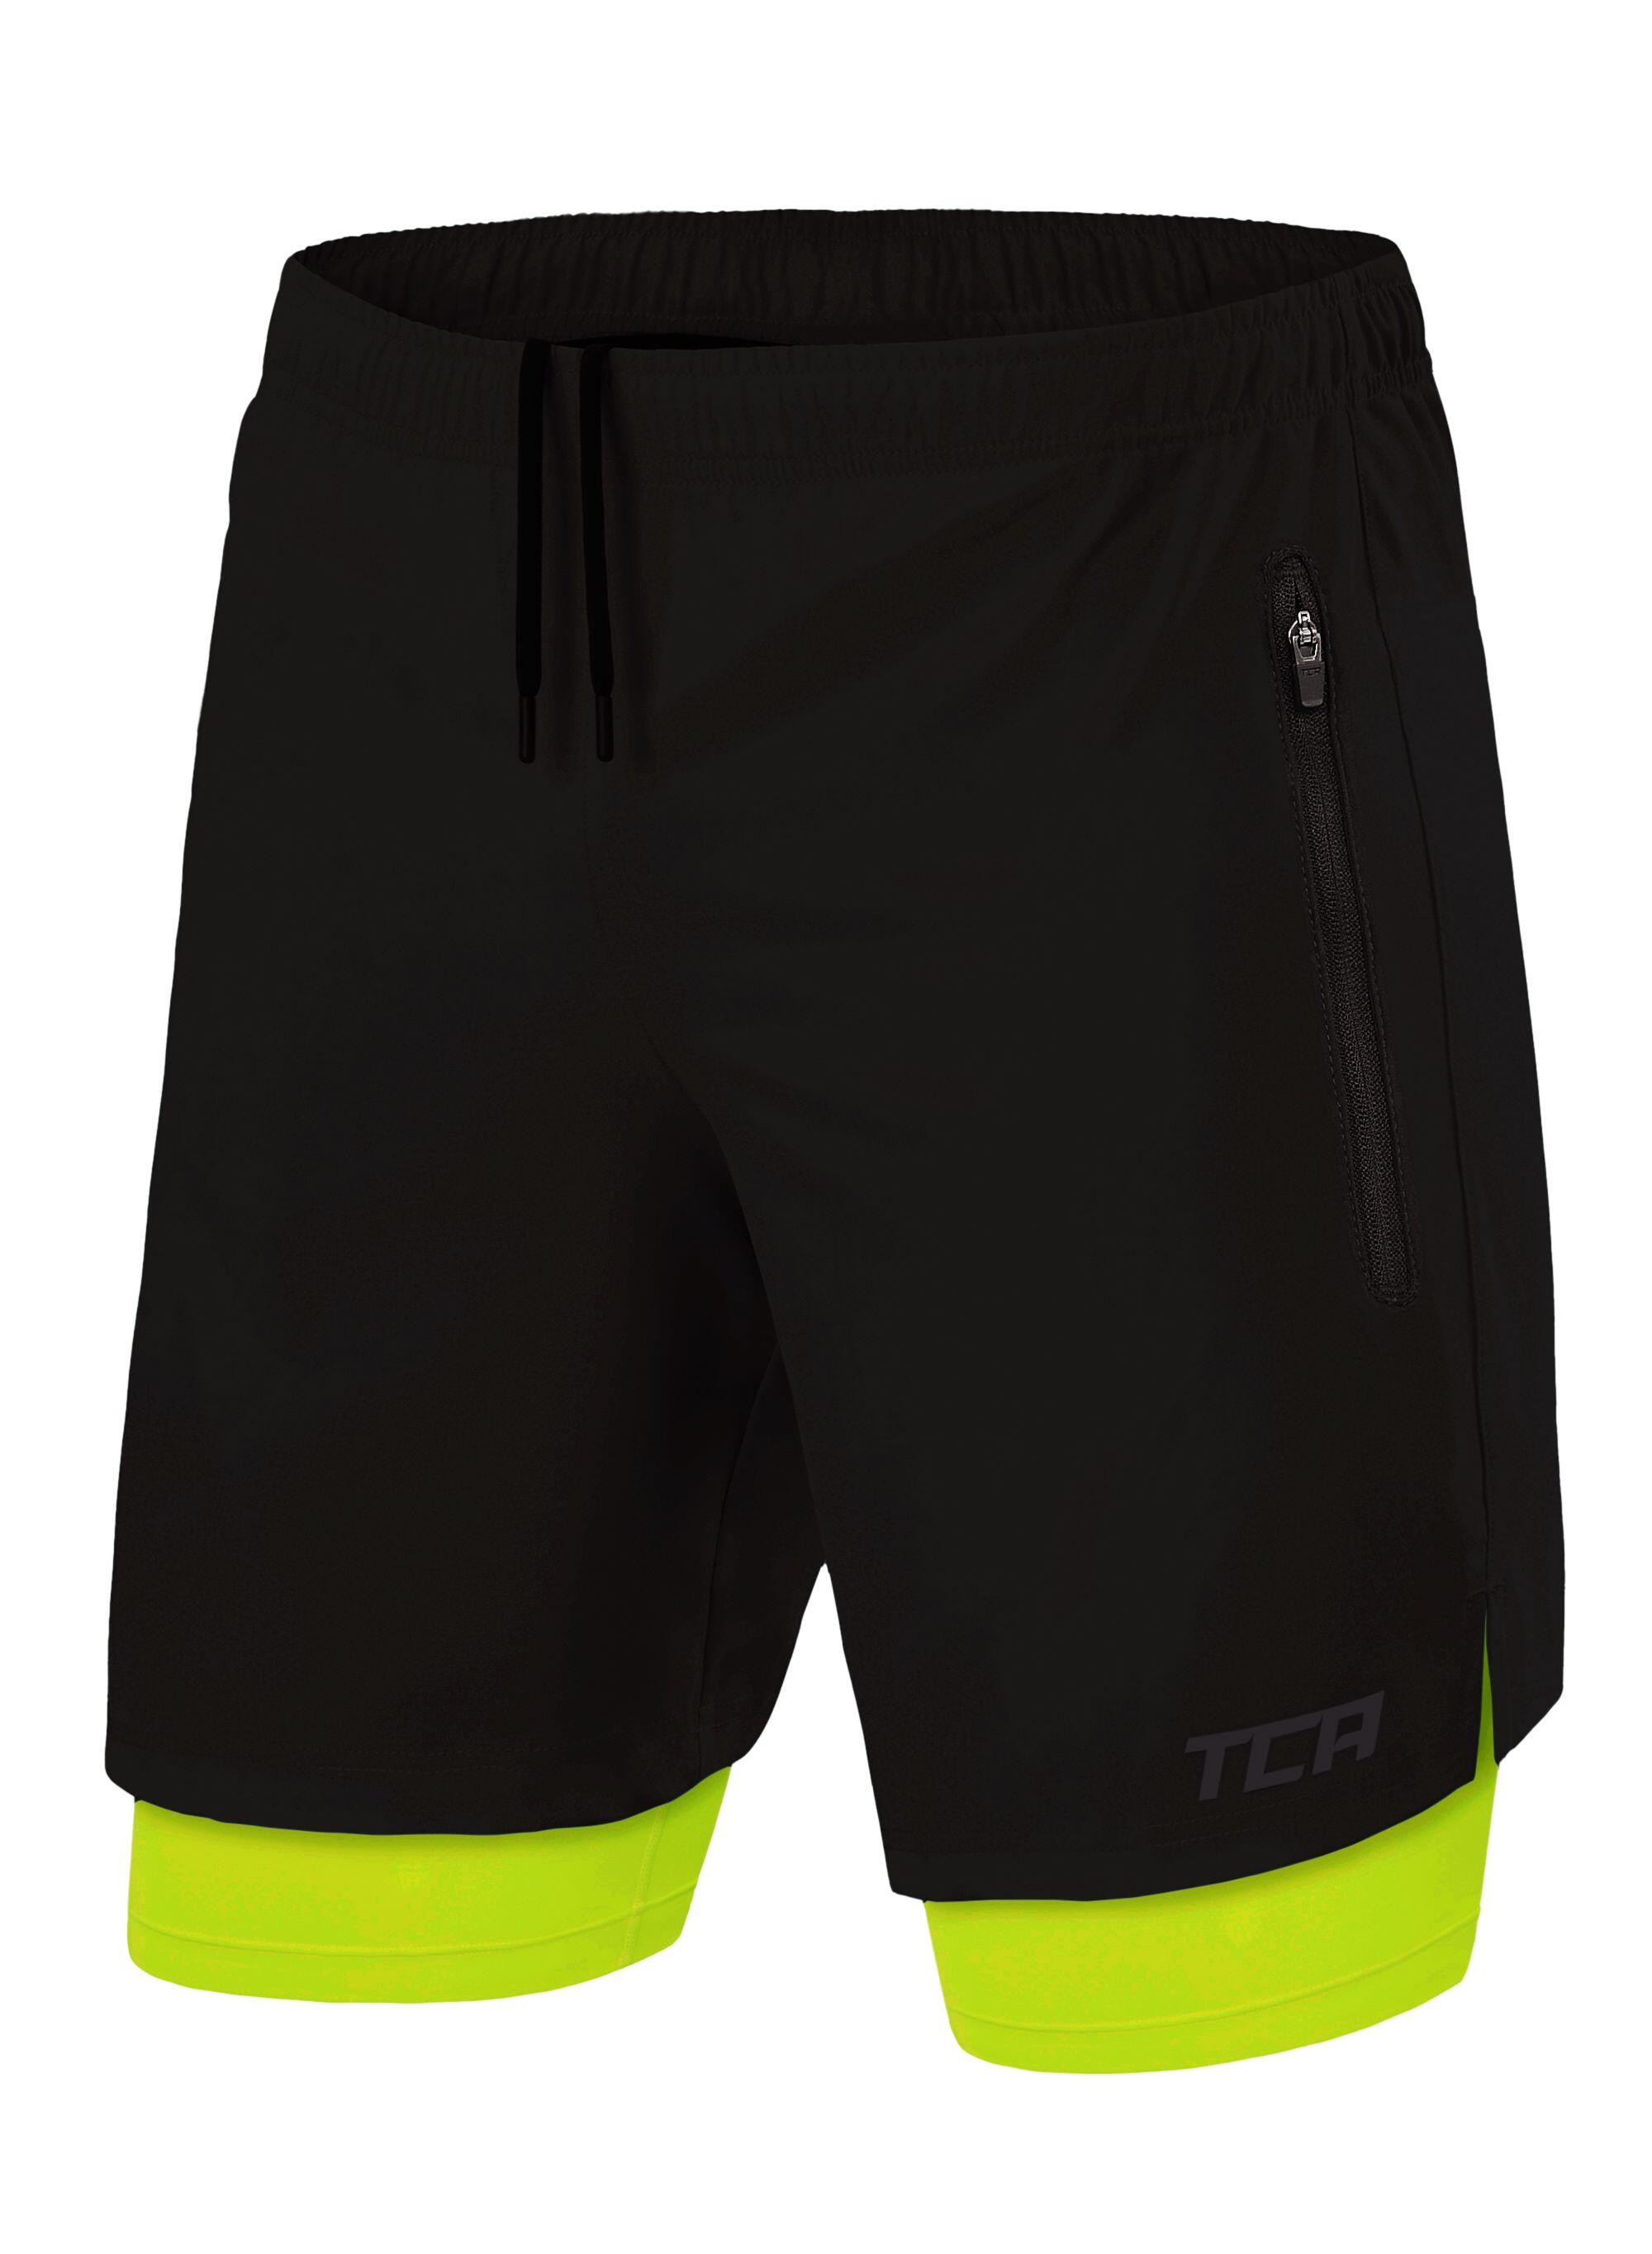 Men's Ultra 2-in-1 Running Shorts with Zip Pockets - Black/Lime Punch 1/5